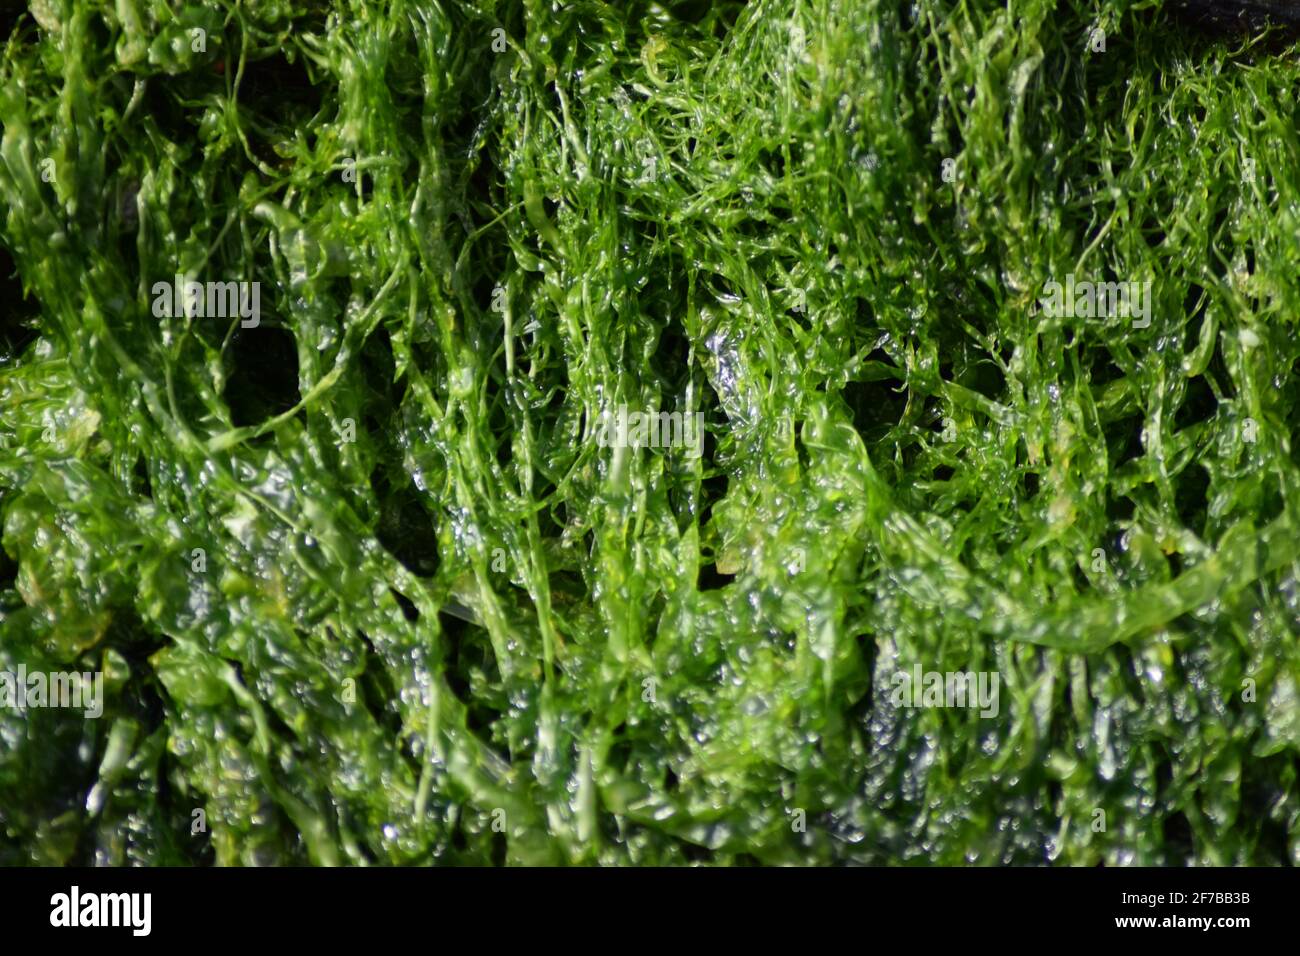 Matted Seaweed Stock Photo